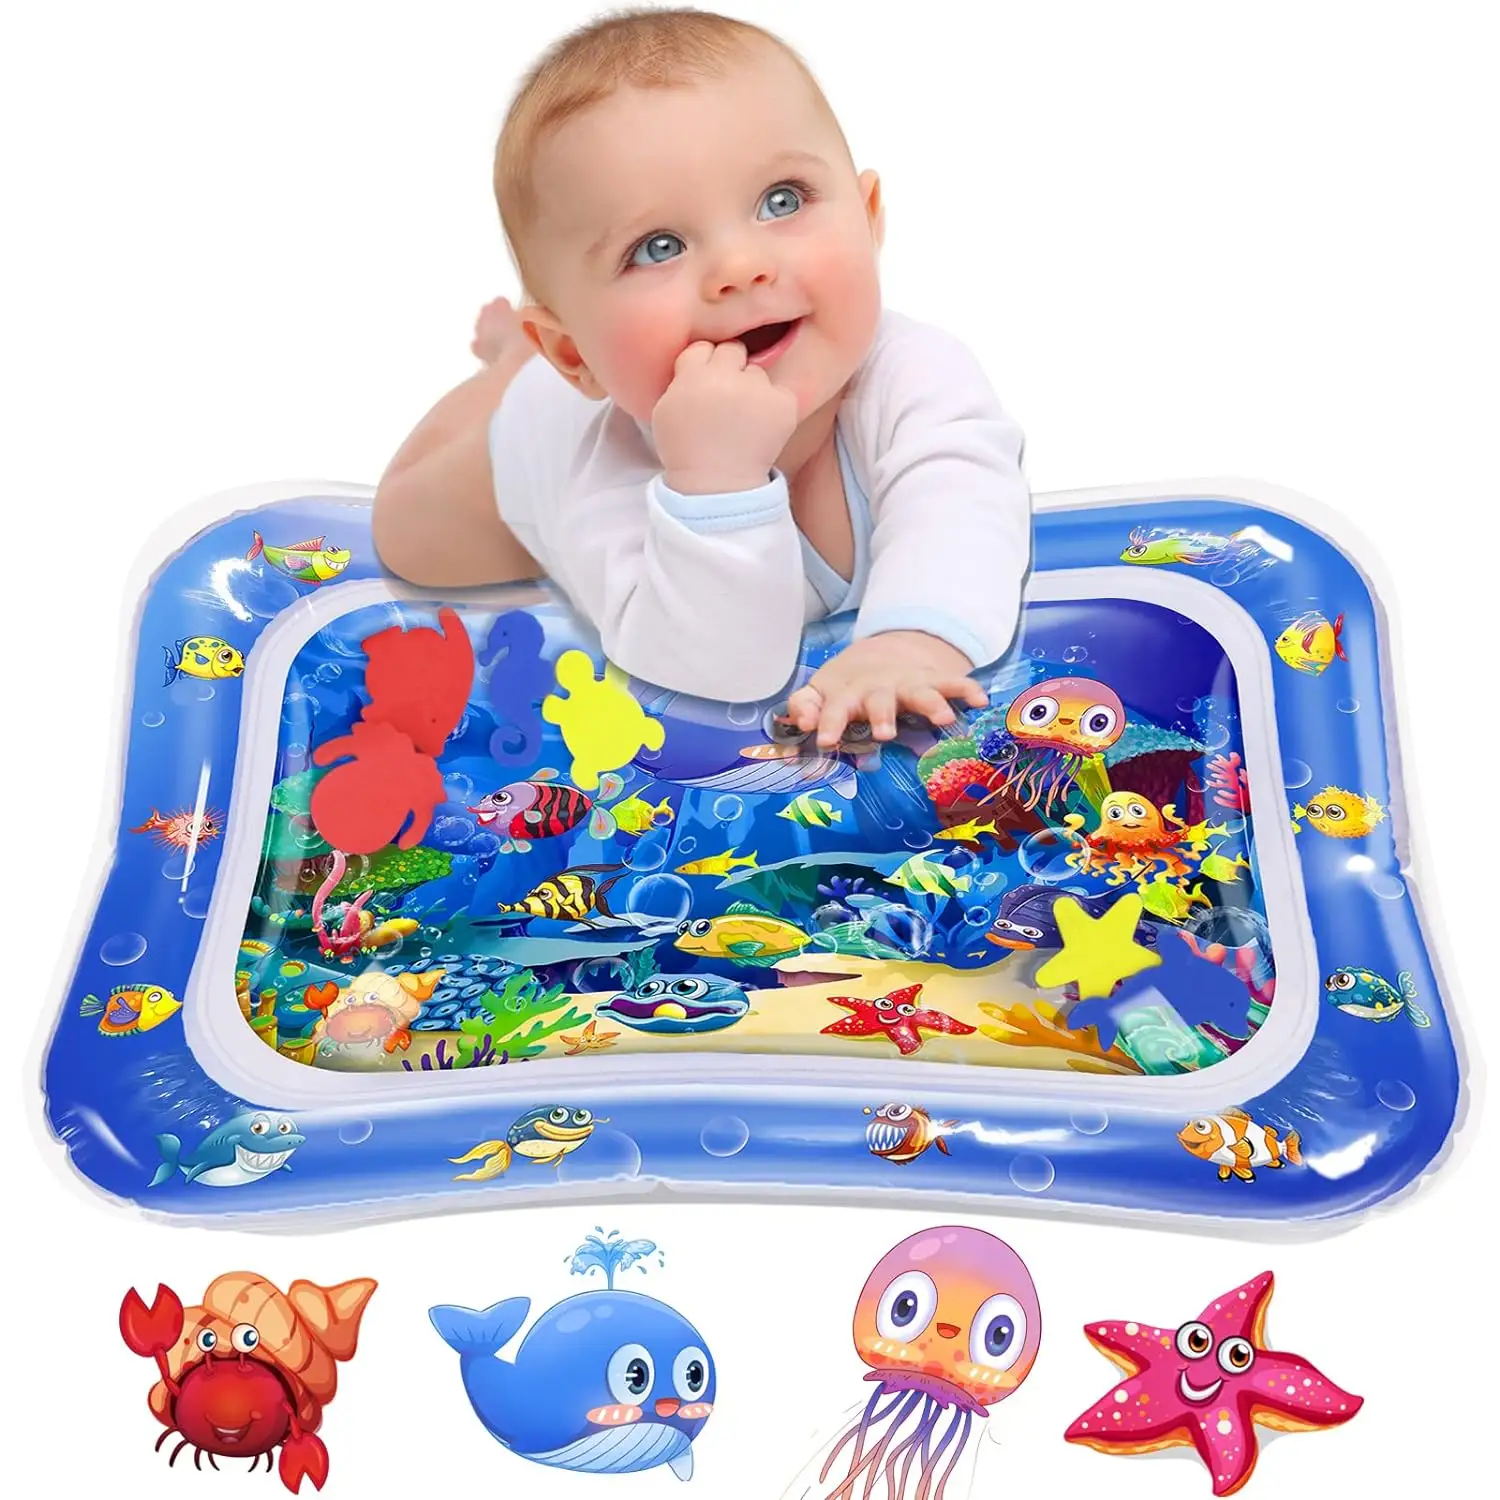 Inflatable Tummy Time Mat Premium Baby Water Play Mat for Infants and Toddlers Baby Toys for 3-24 Months